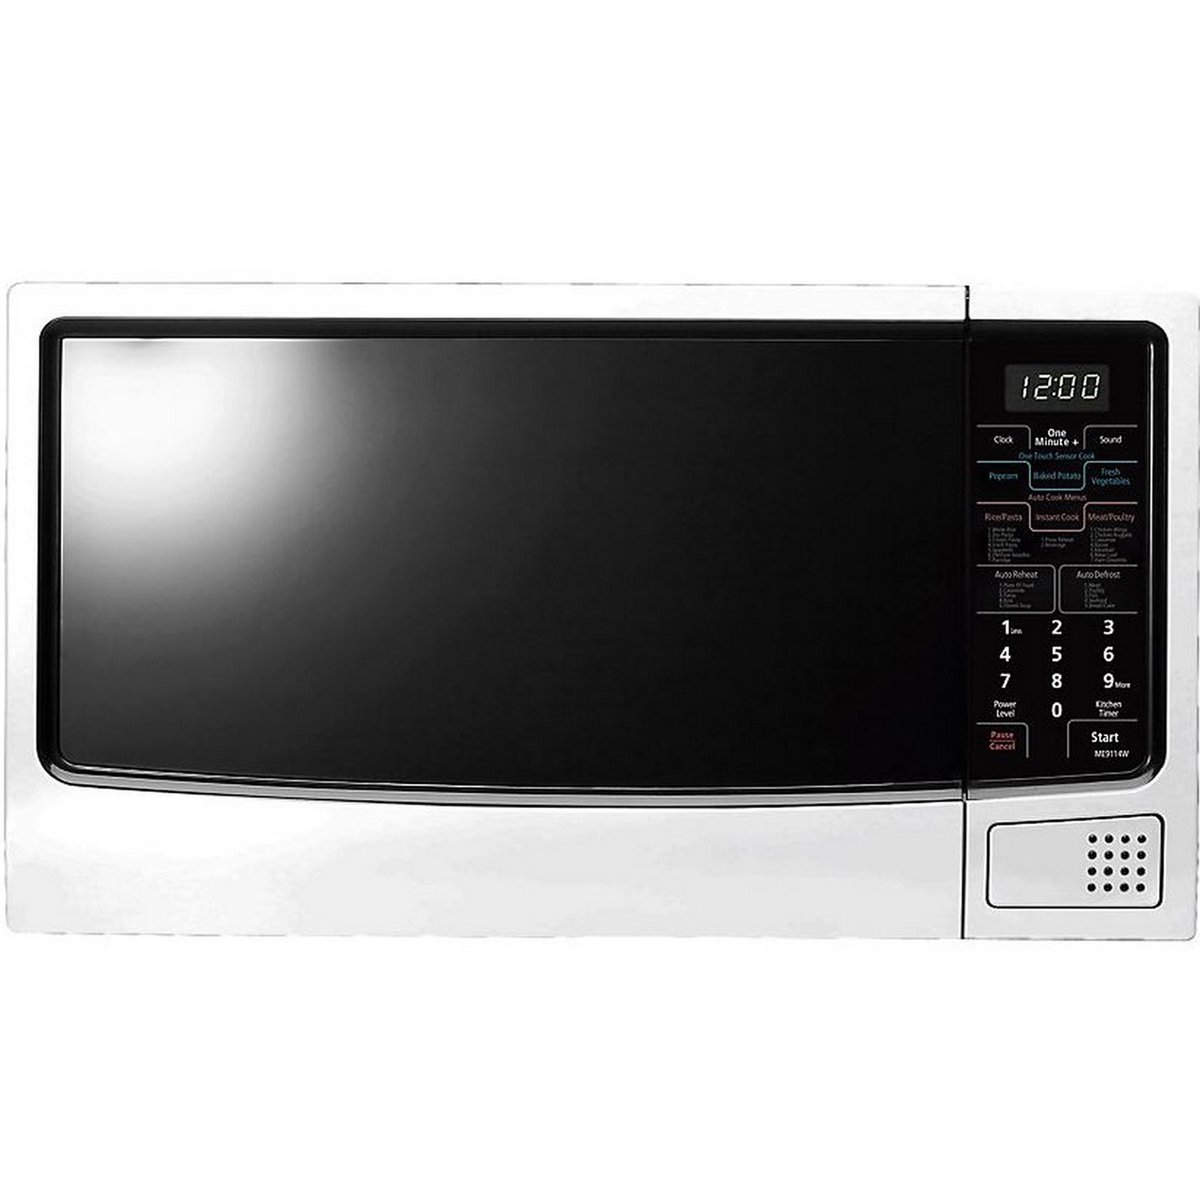 Samsung Microwave Oven ME9114W 32Ltr